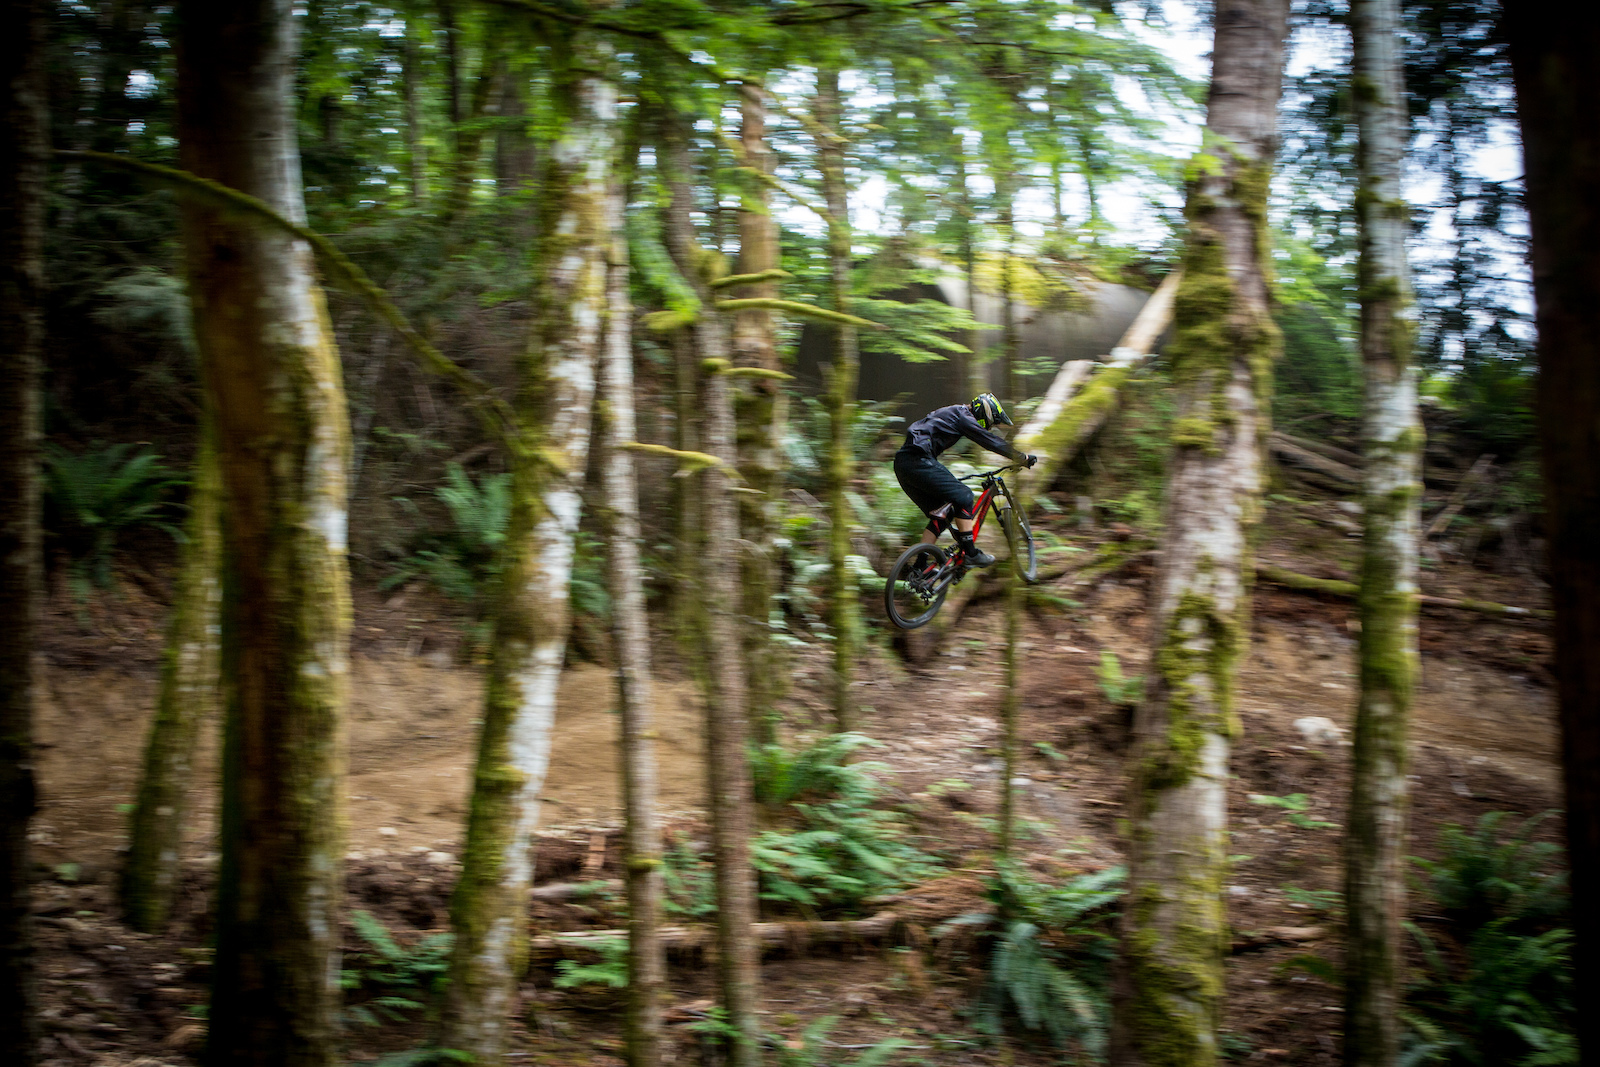 Sliver trail is a blur of good times